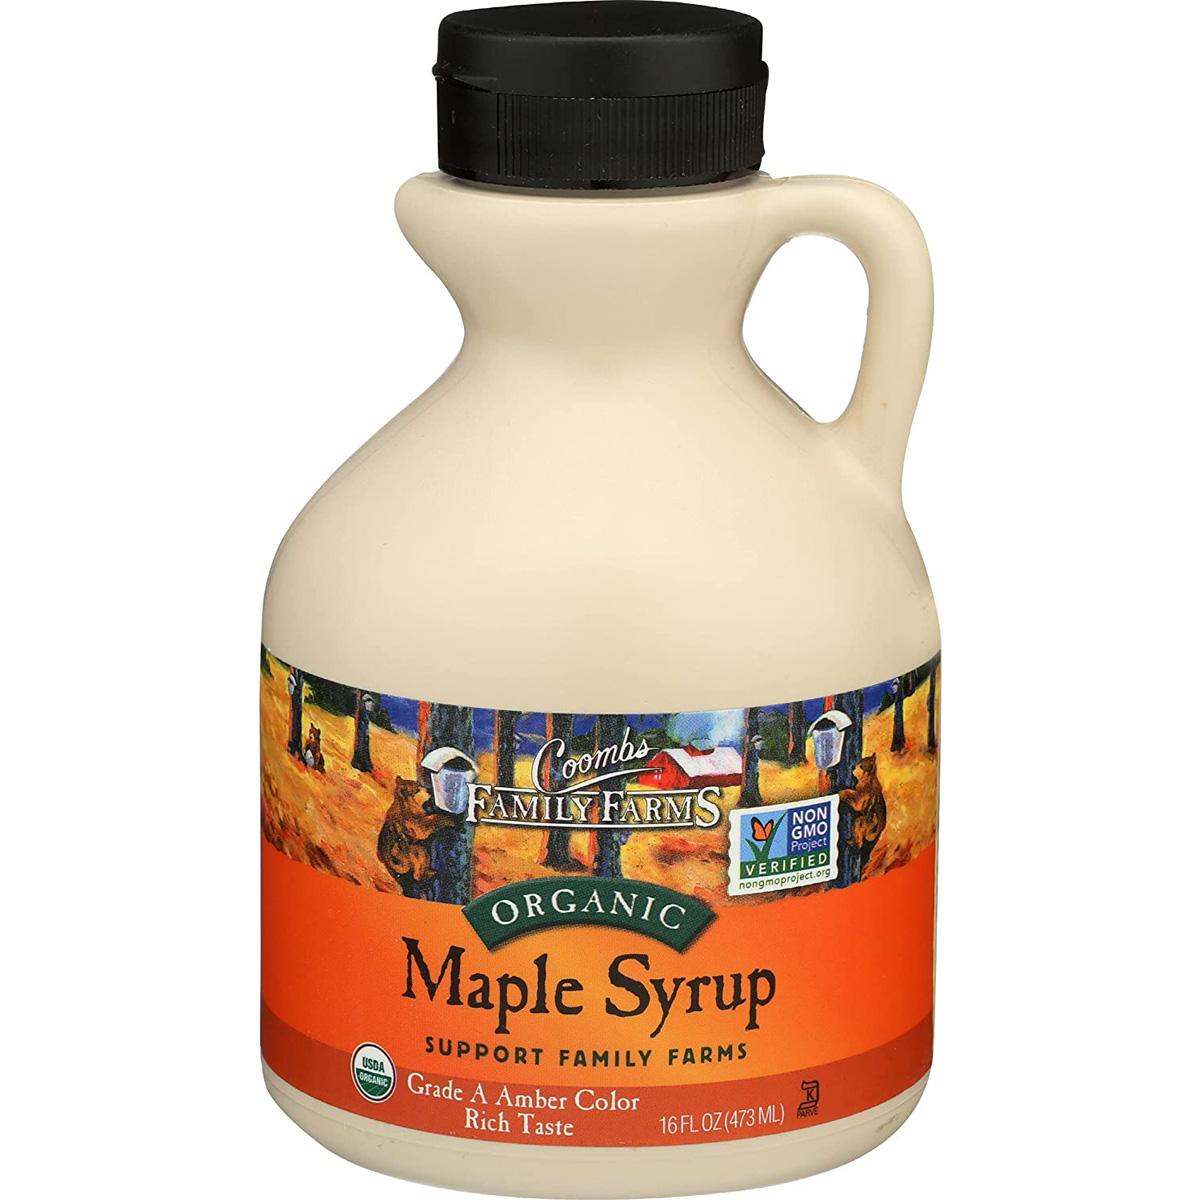 Coombs Family Farms Organic Maple Syrup for $8.21 Shipped